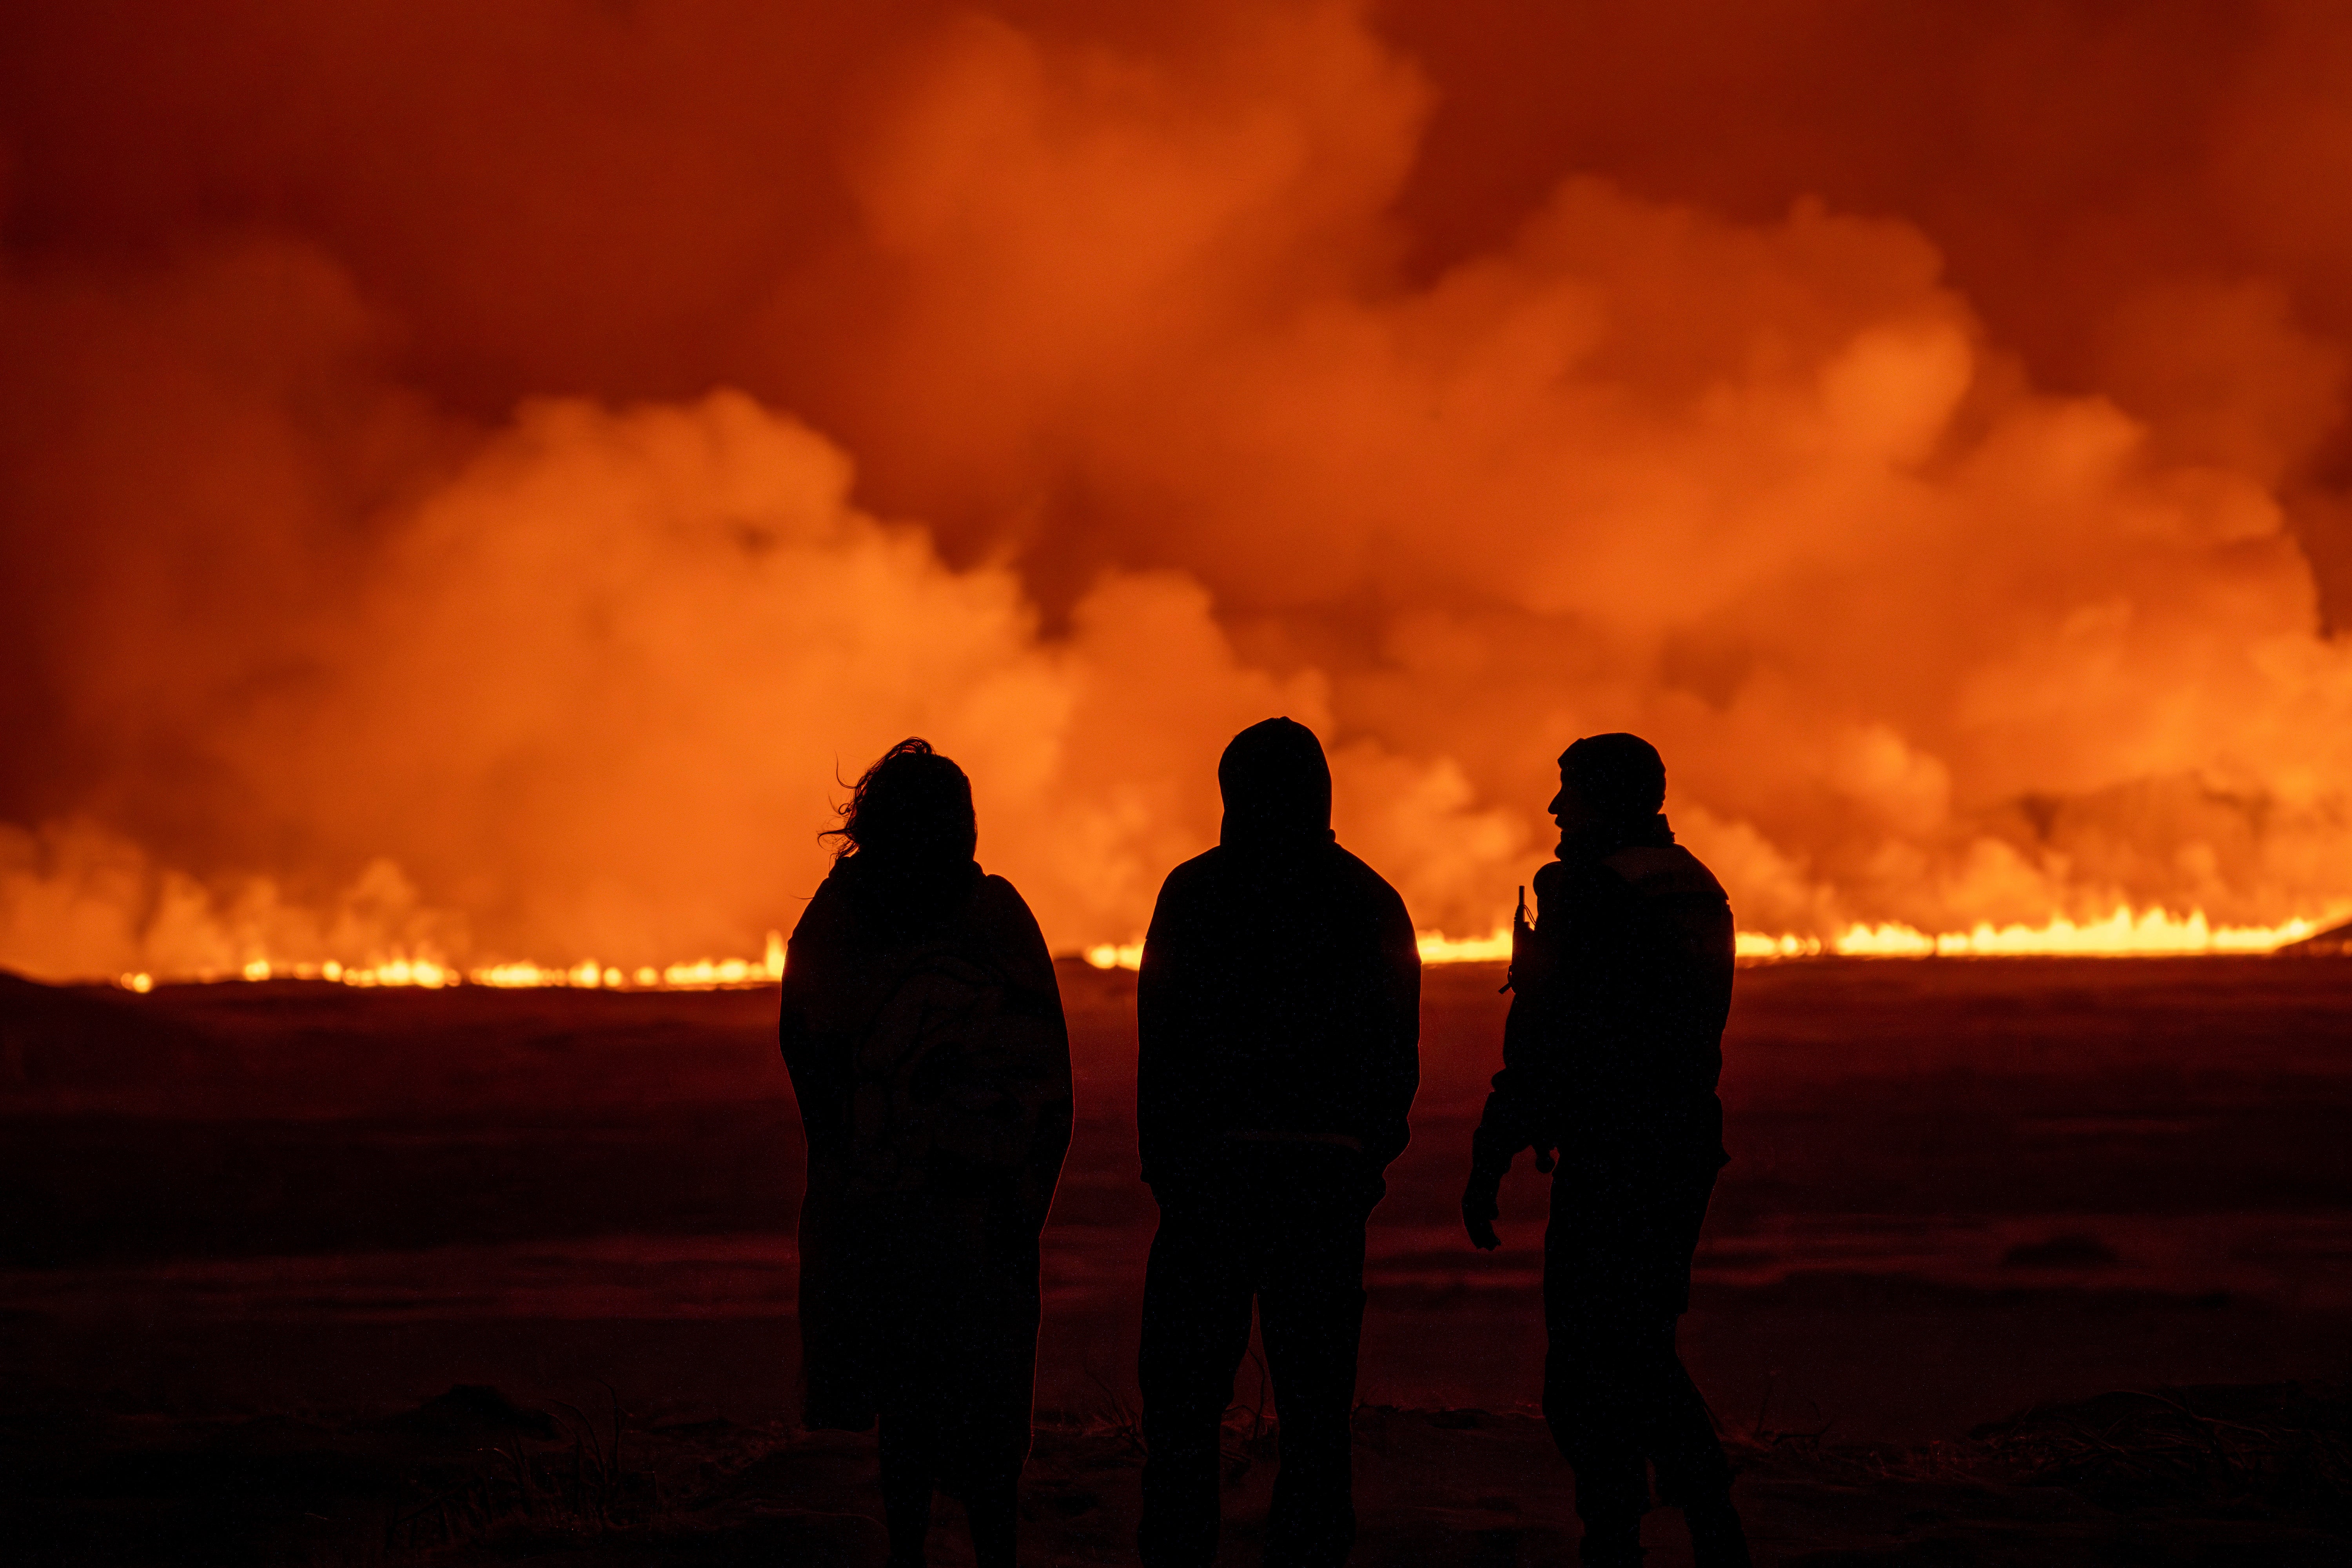 Revellers braved the ferocious heat of Iceland’s volcano as it sent toxic plumes and lava into the night sky